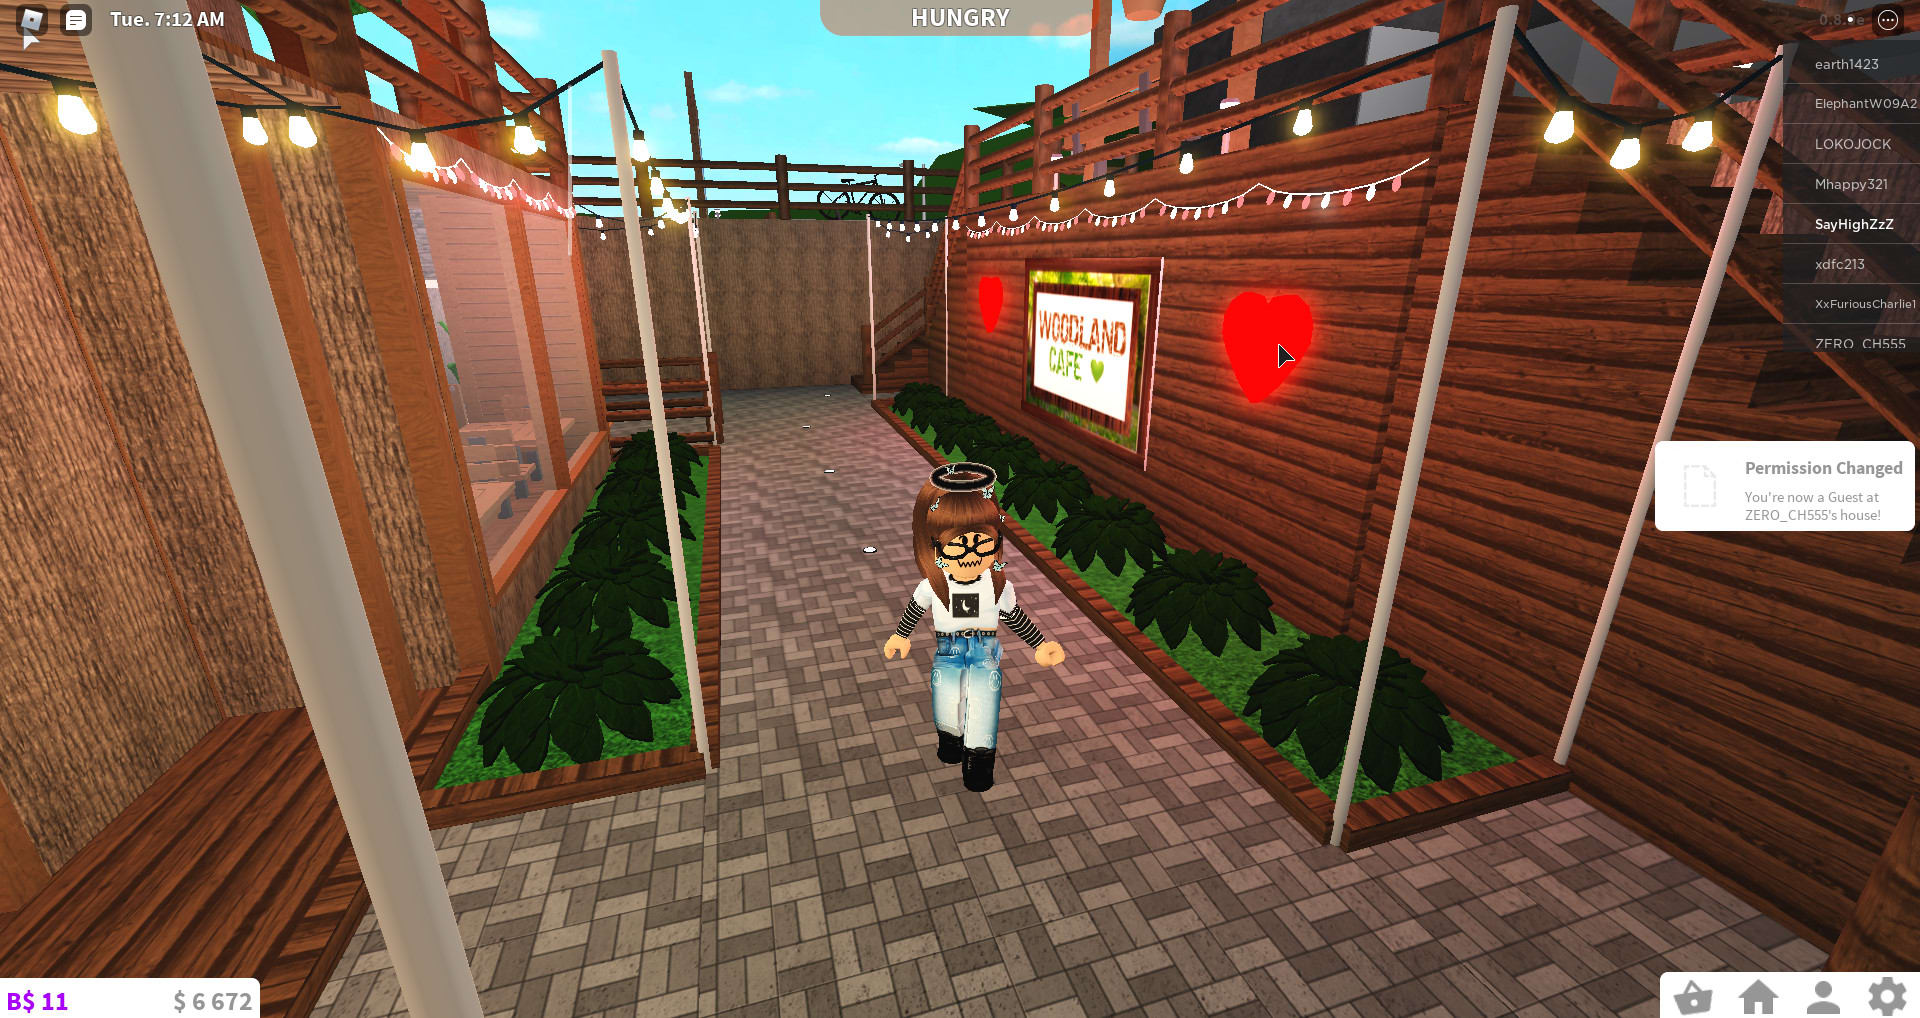 Build You A Nice Cafe Or Restaurant On Roblox Bloxburg By Sayhighzz Fiverr - how to make a caffea game in roblox